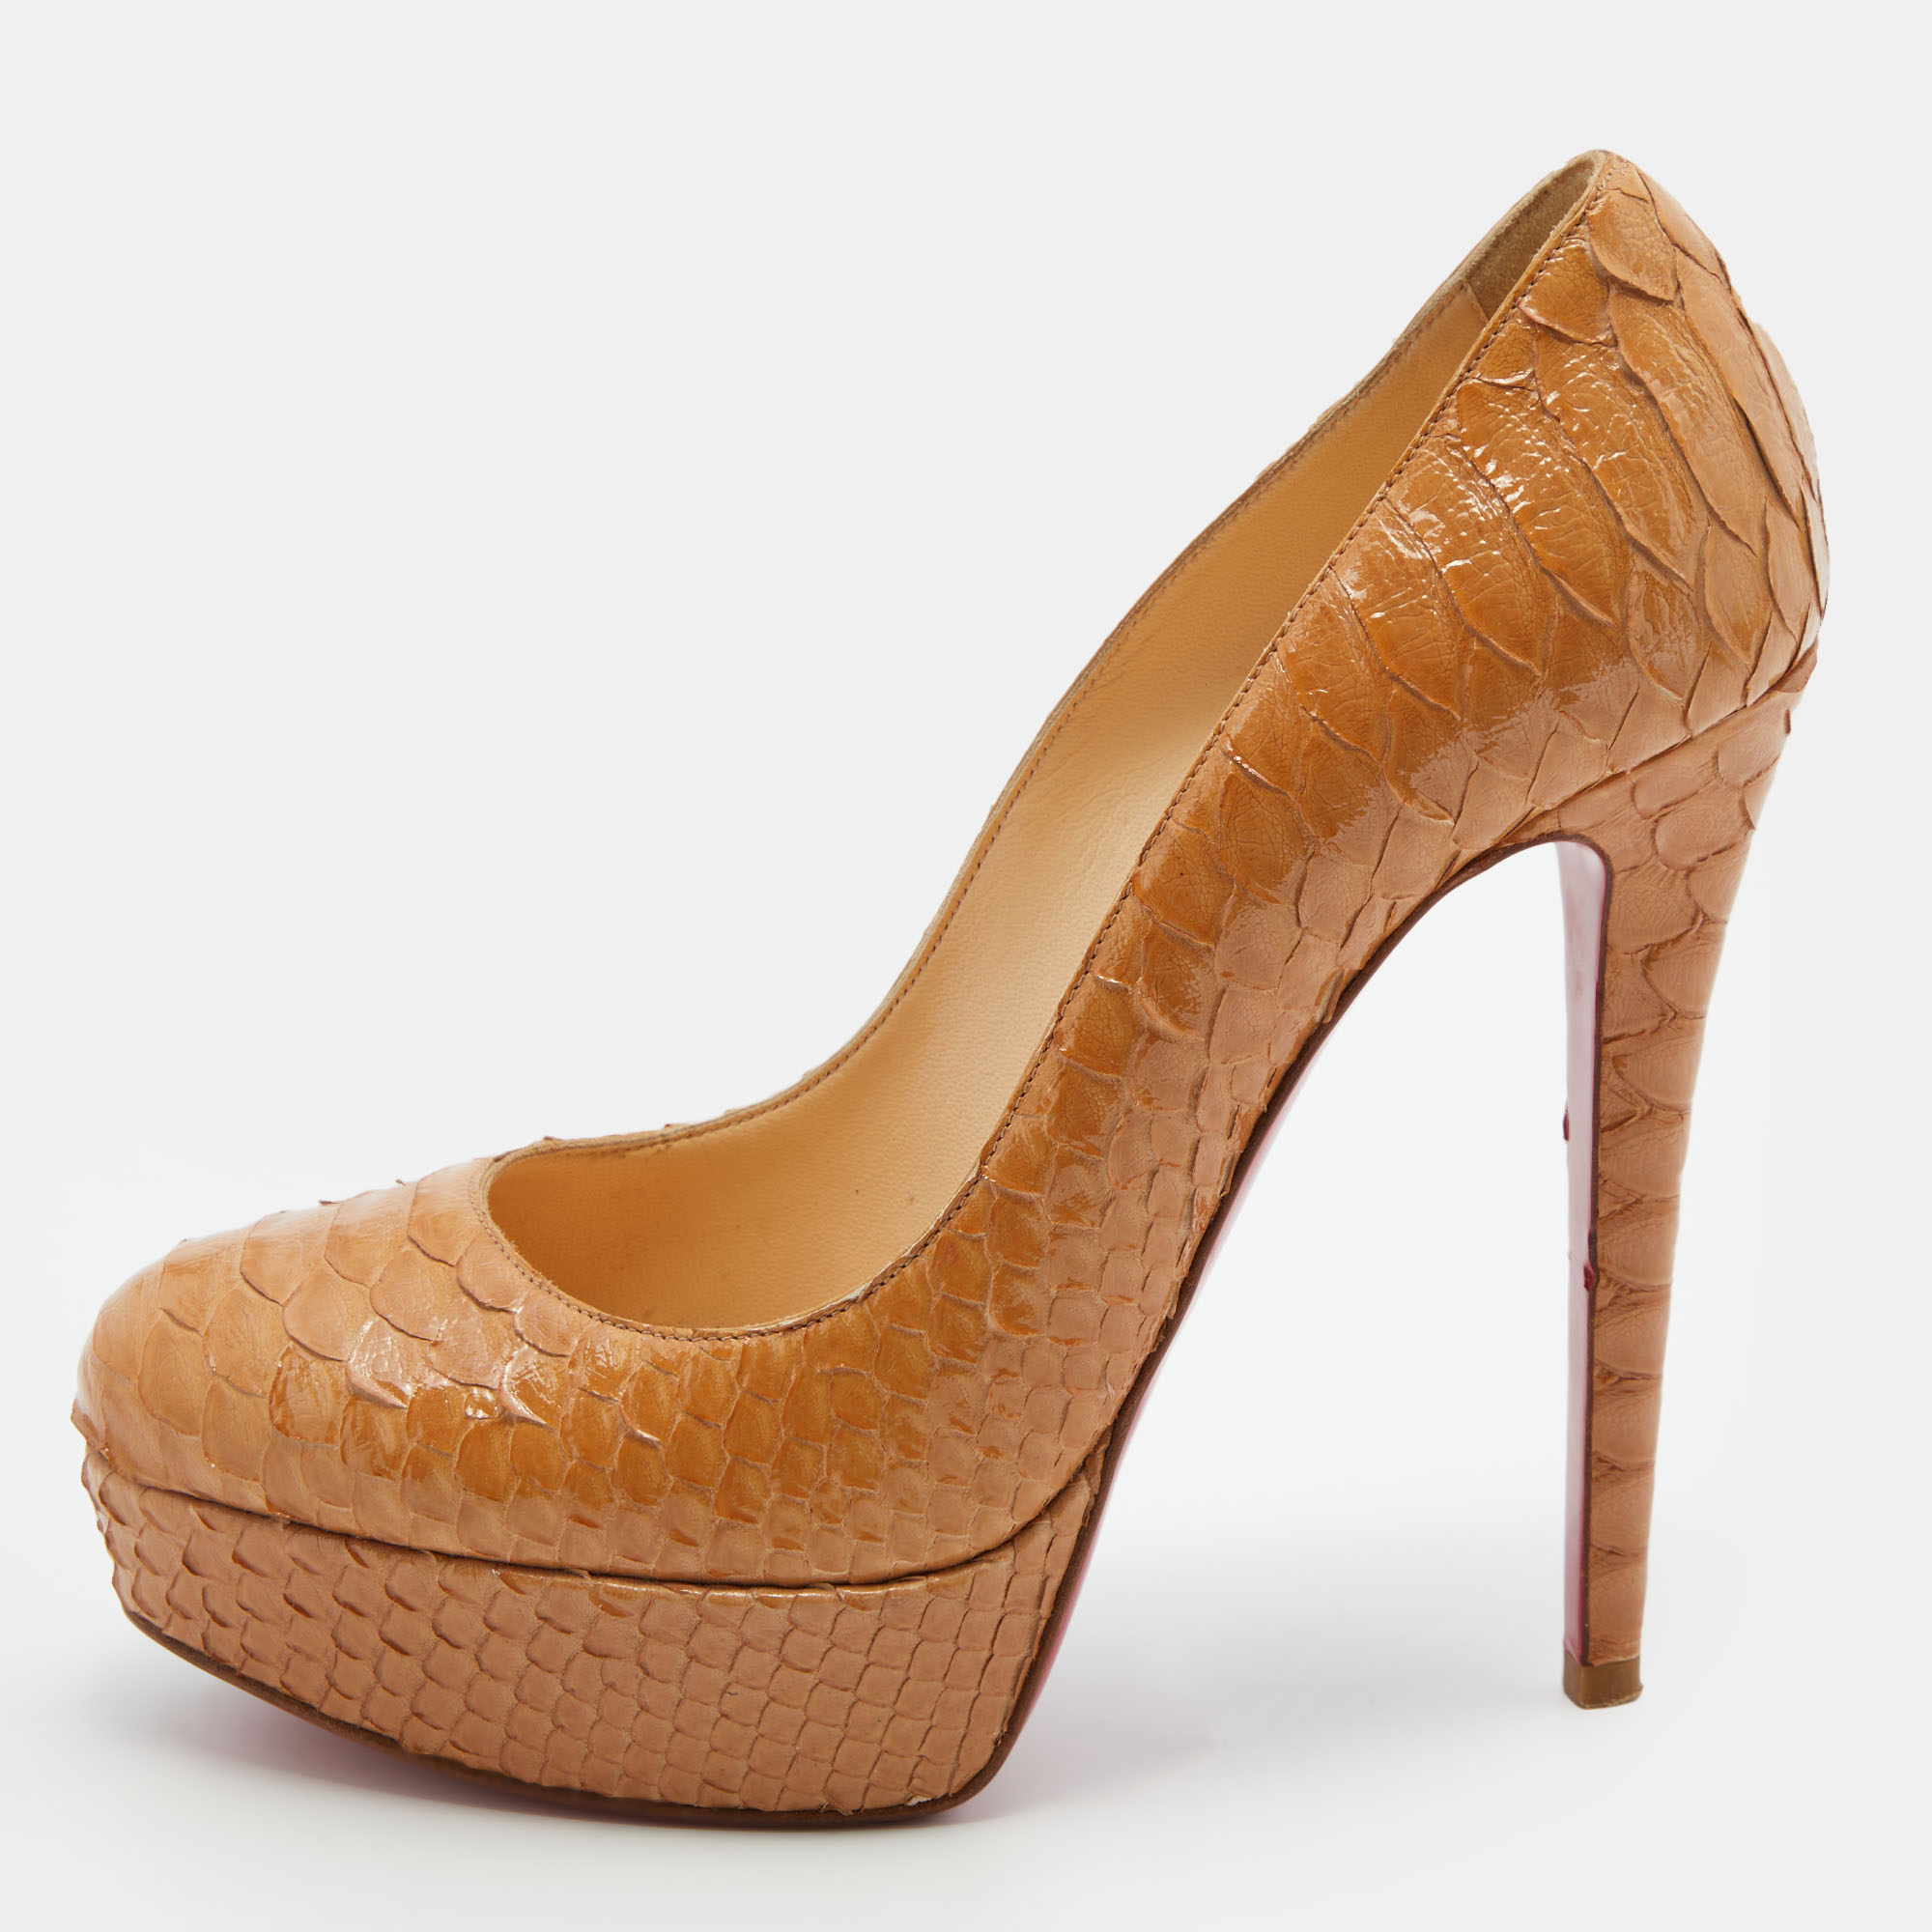 Pre-owned Christian Louboutin Light Brown Python Leather Bianca Platform Pumps Size 37